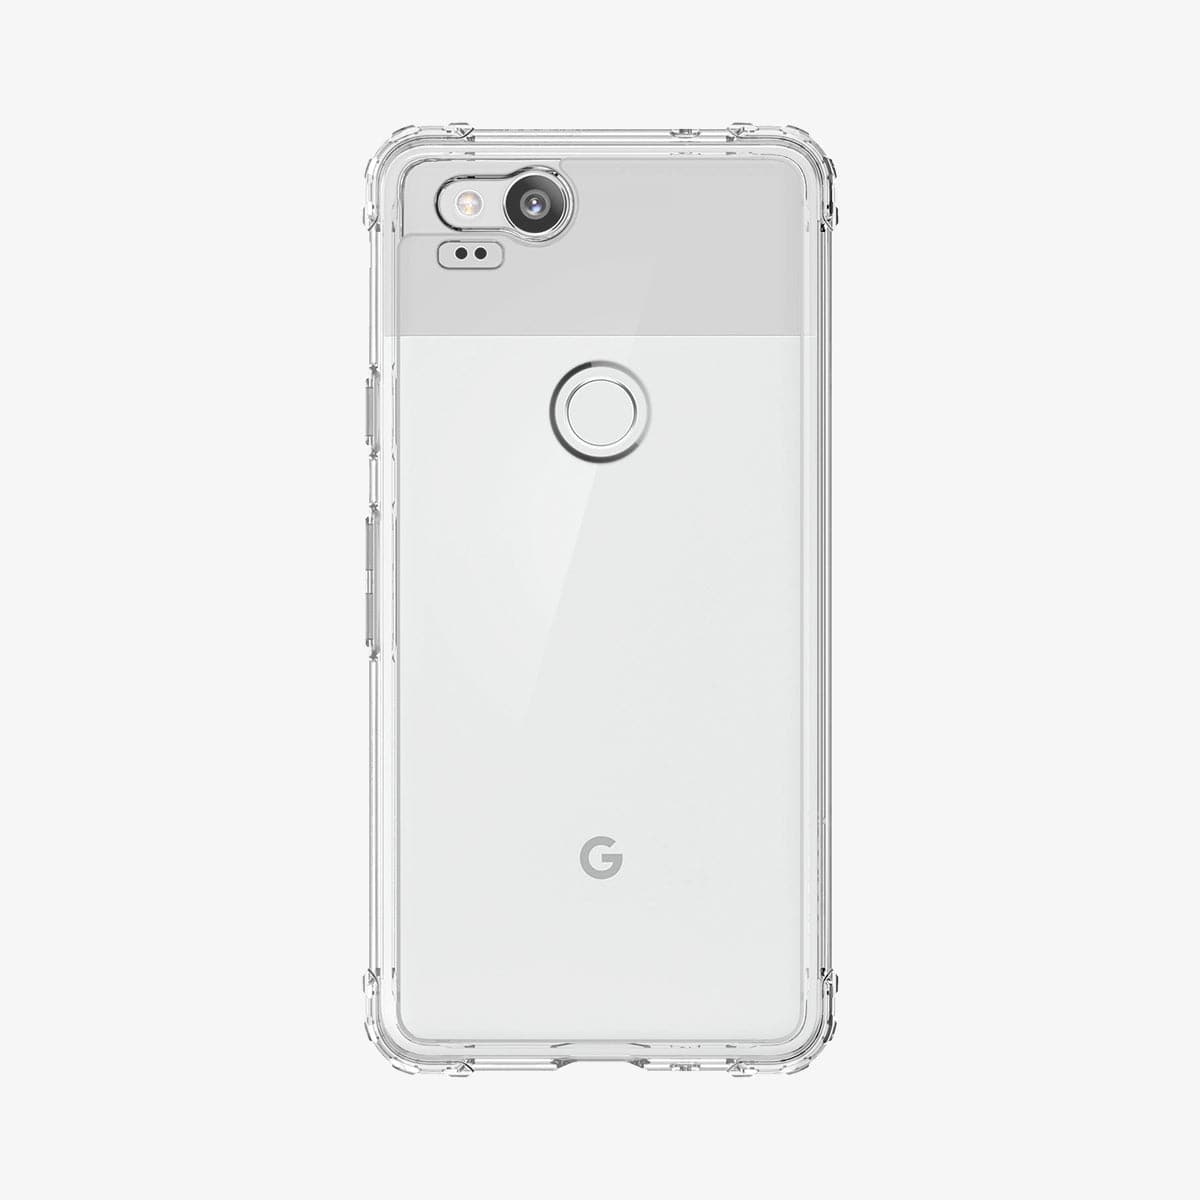 F16CS22252 - Pixel 2 Case Crystal Shell in crystal clear showing the back